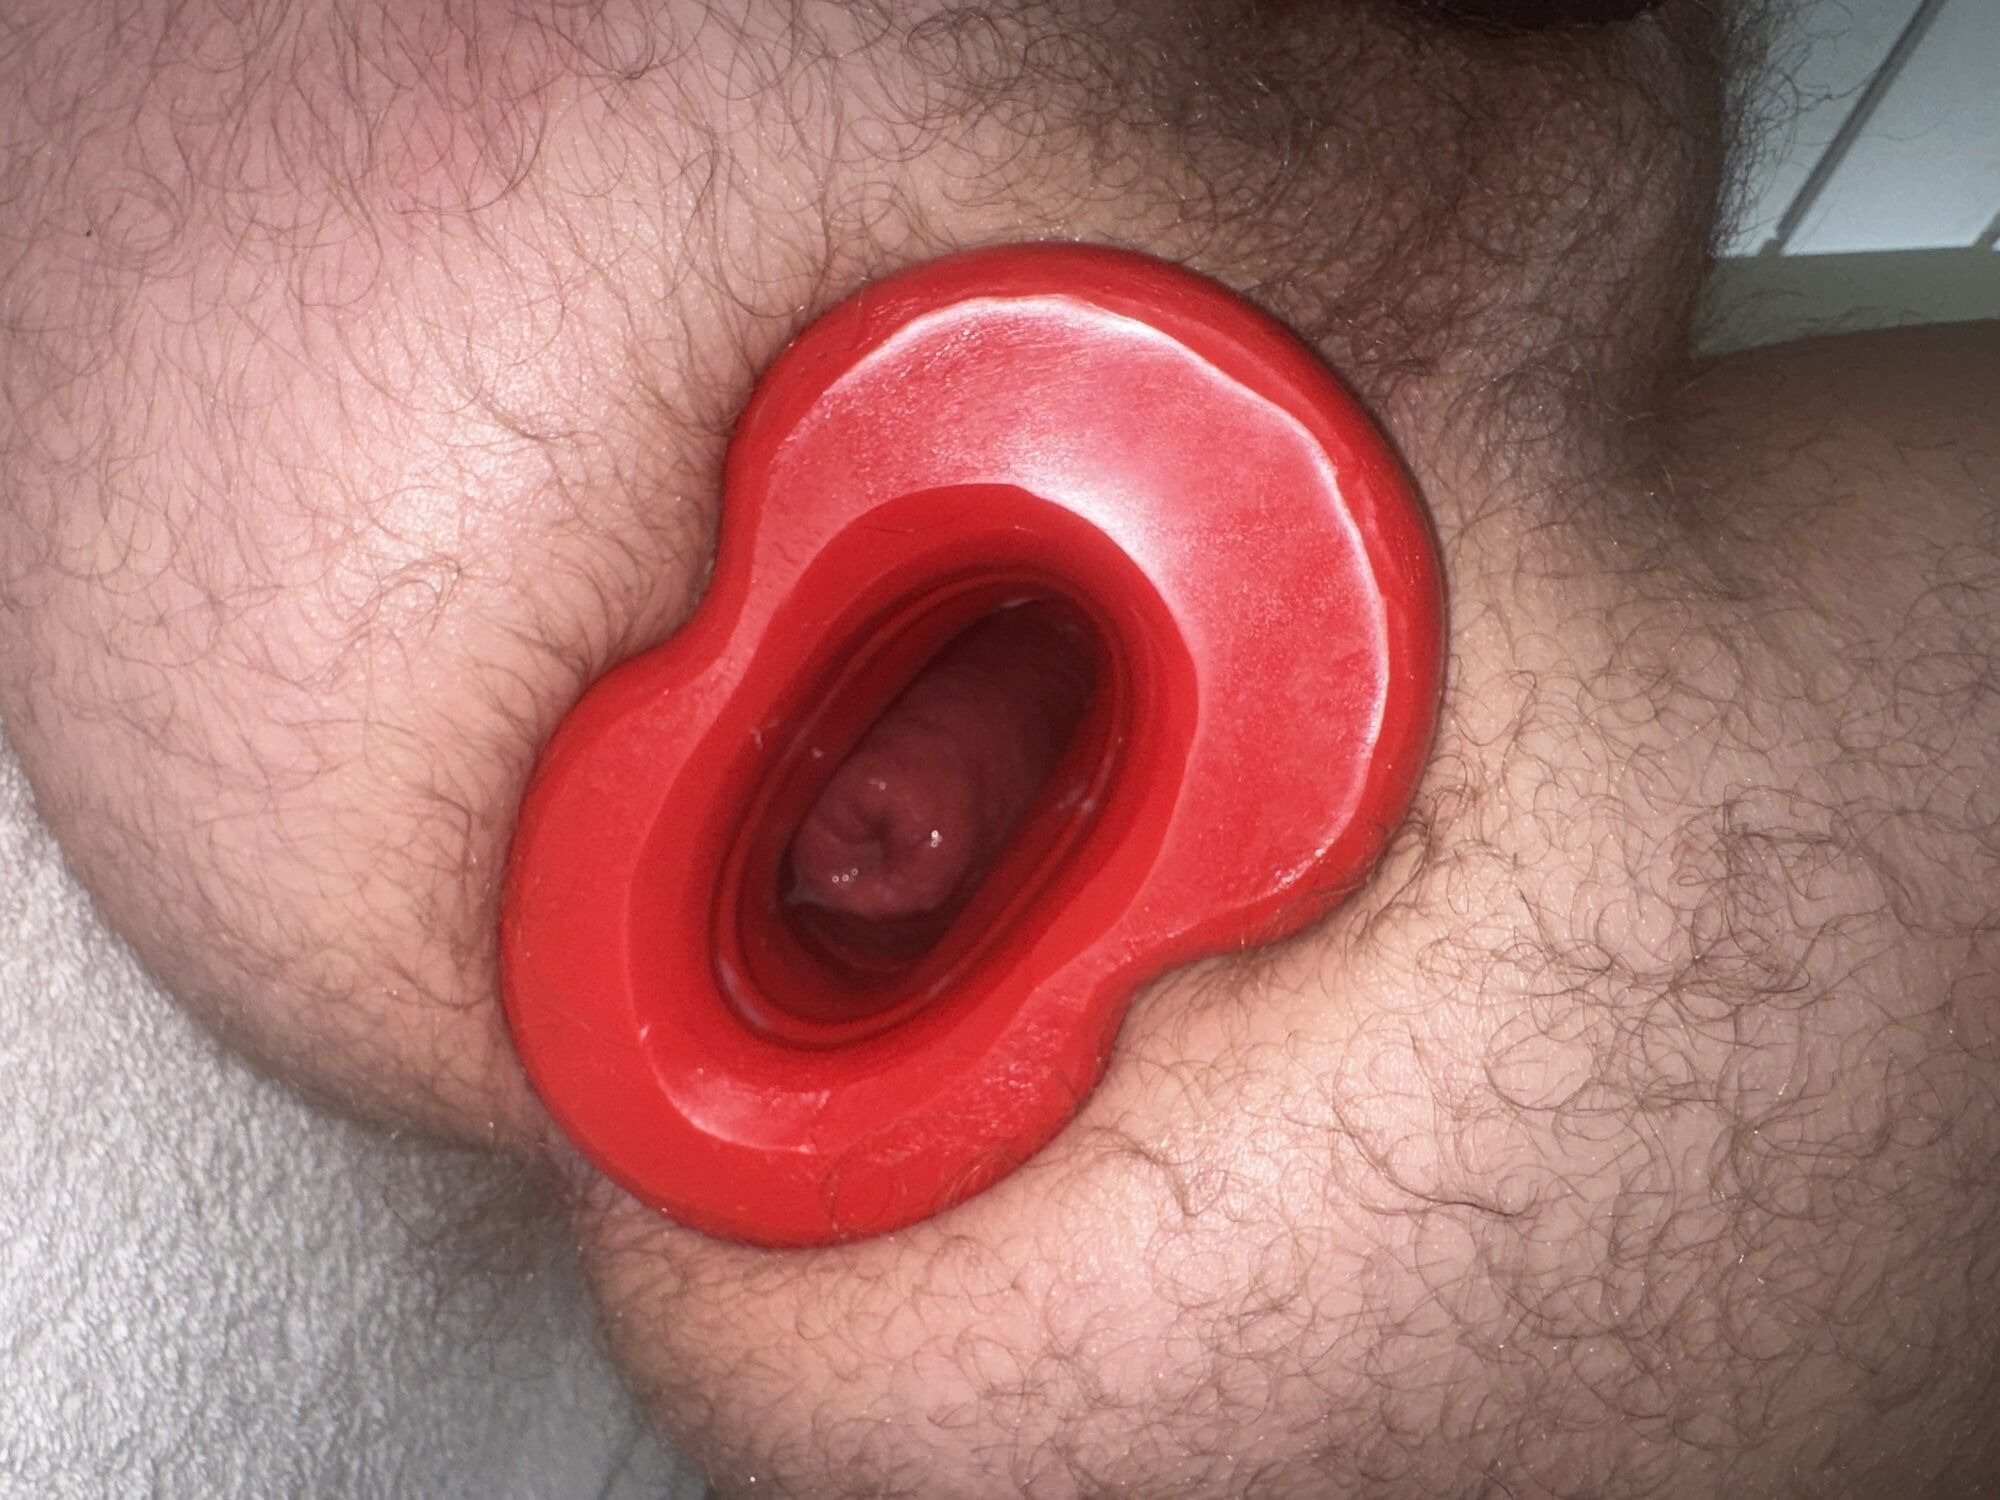 Anal prolapse in oxball ff pighole #8